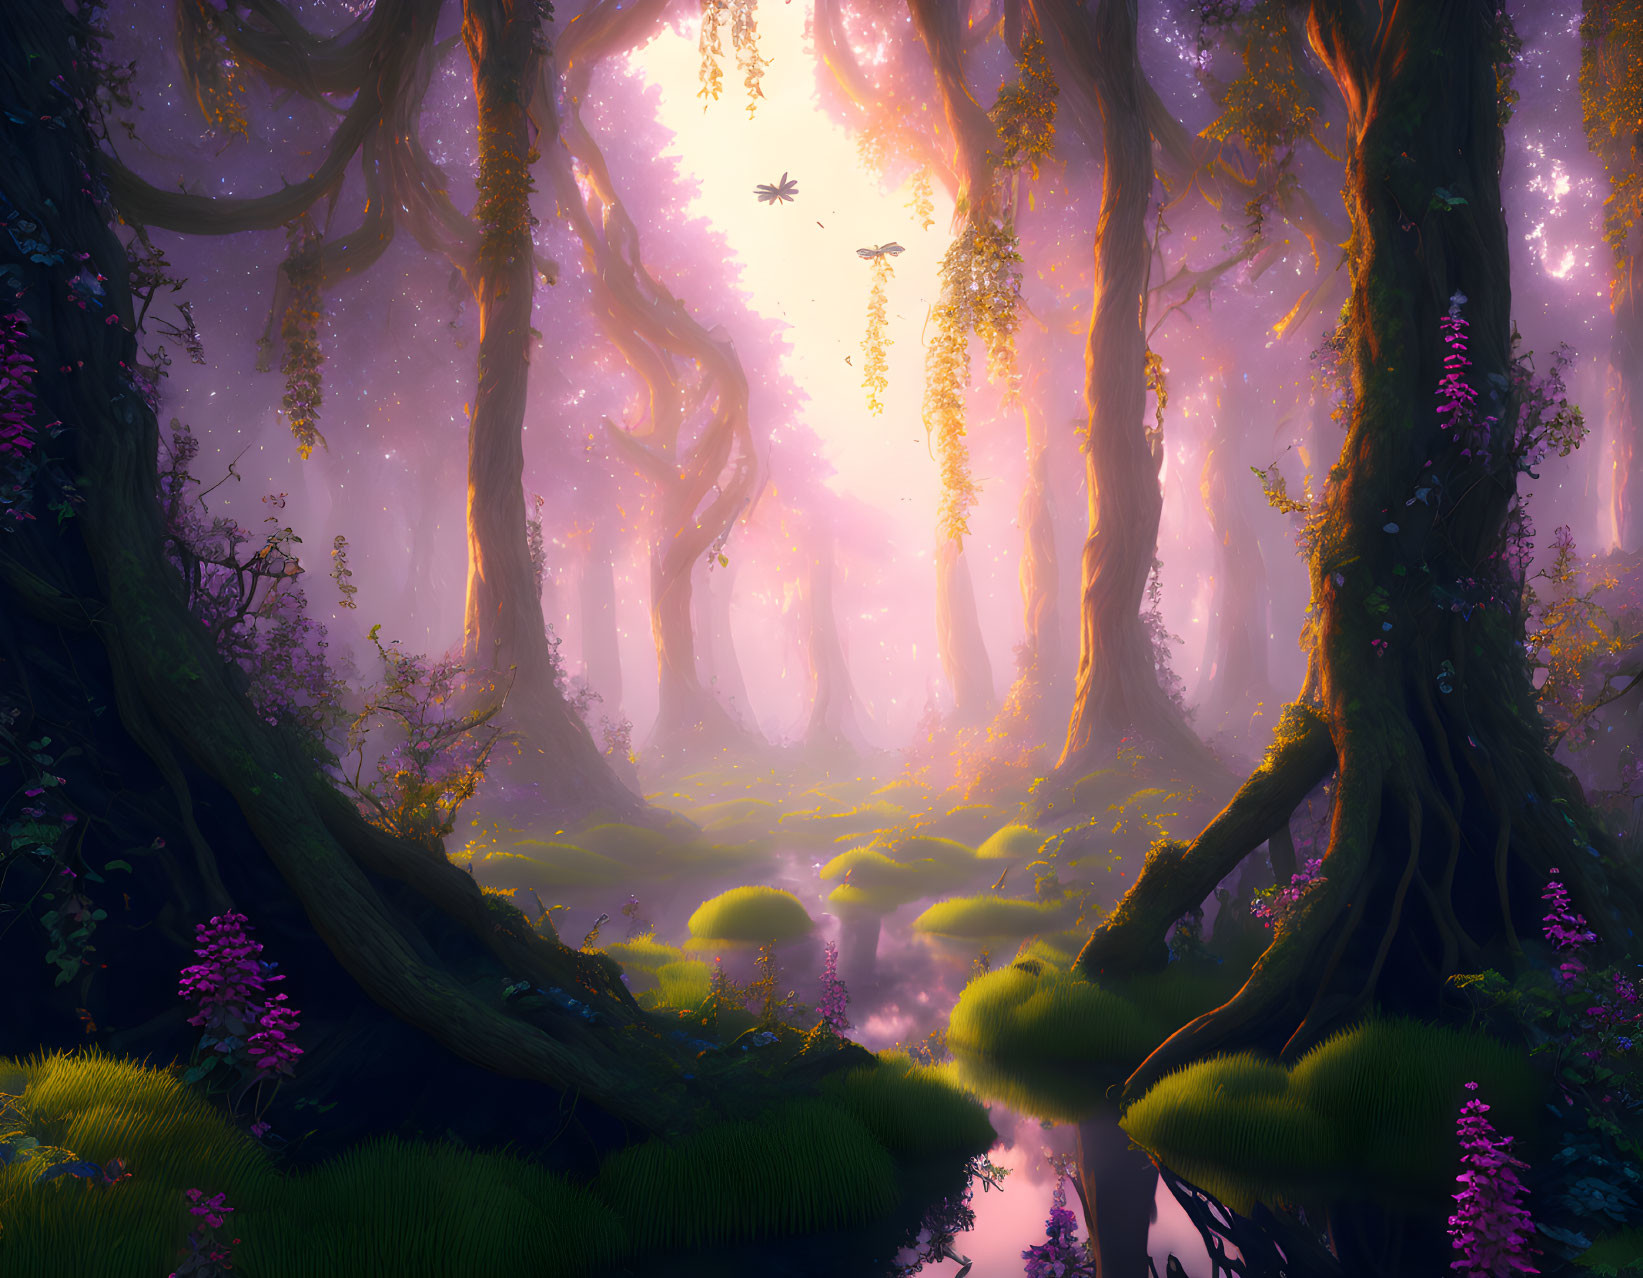 Enchanted forest with glowing purple hues and fantastical creatures.